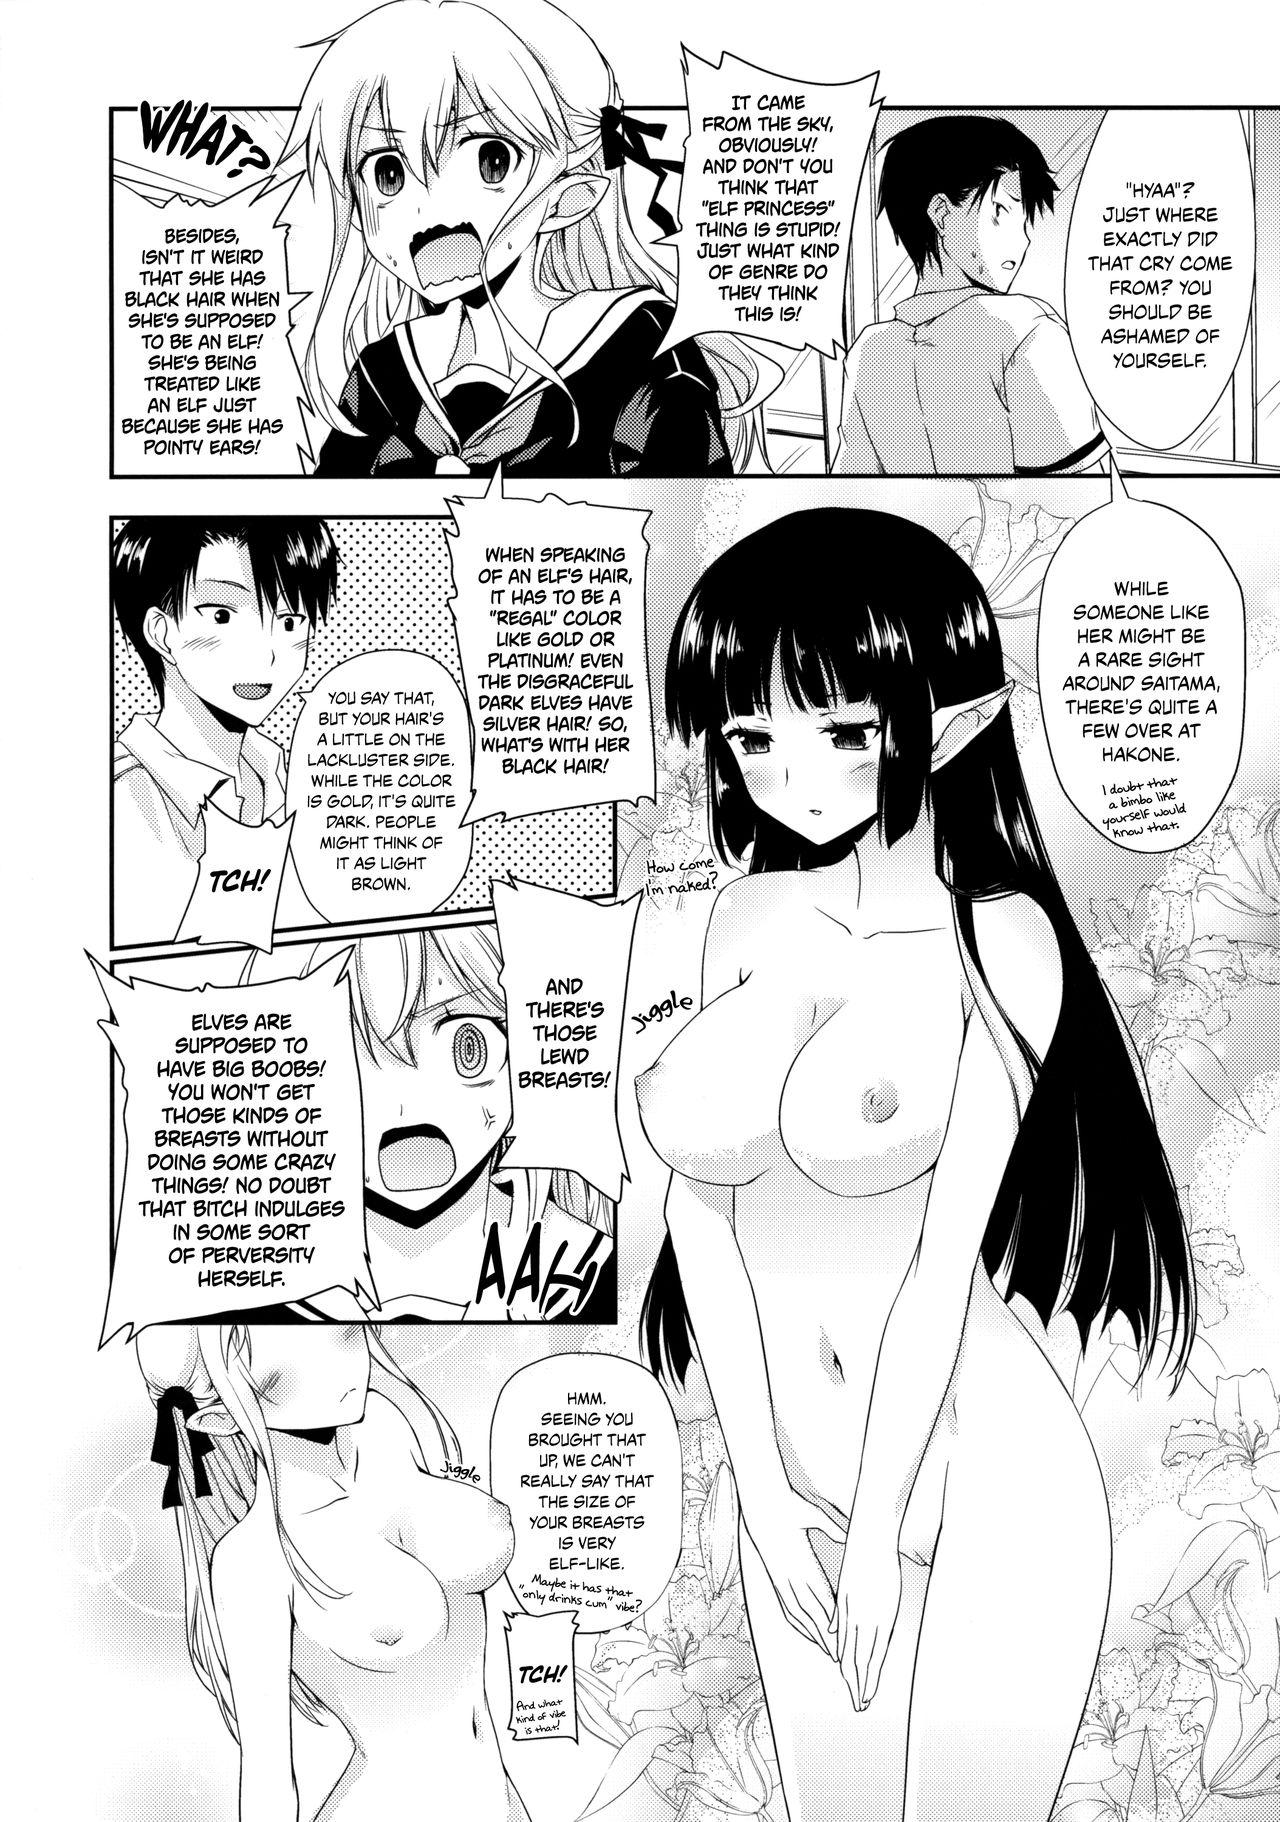 Erotic Elf tte iu no wa! | The Thing About Elves! - Original Tribbing - Page 5